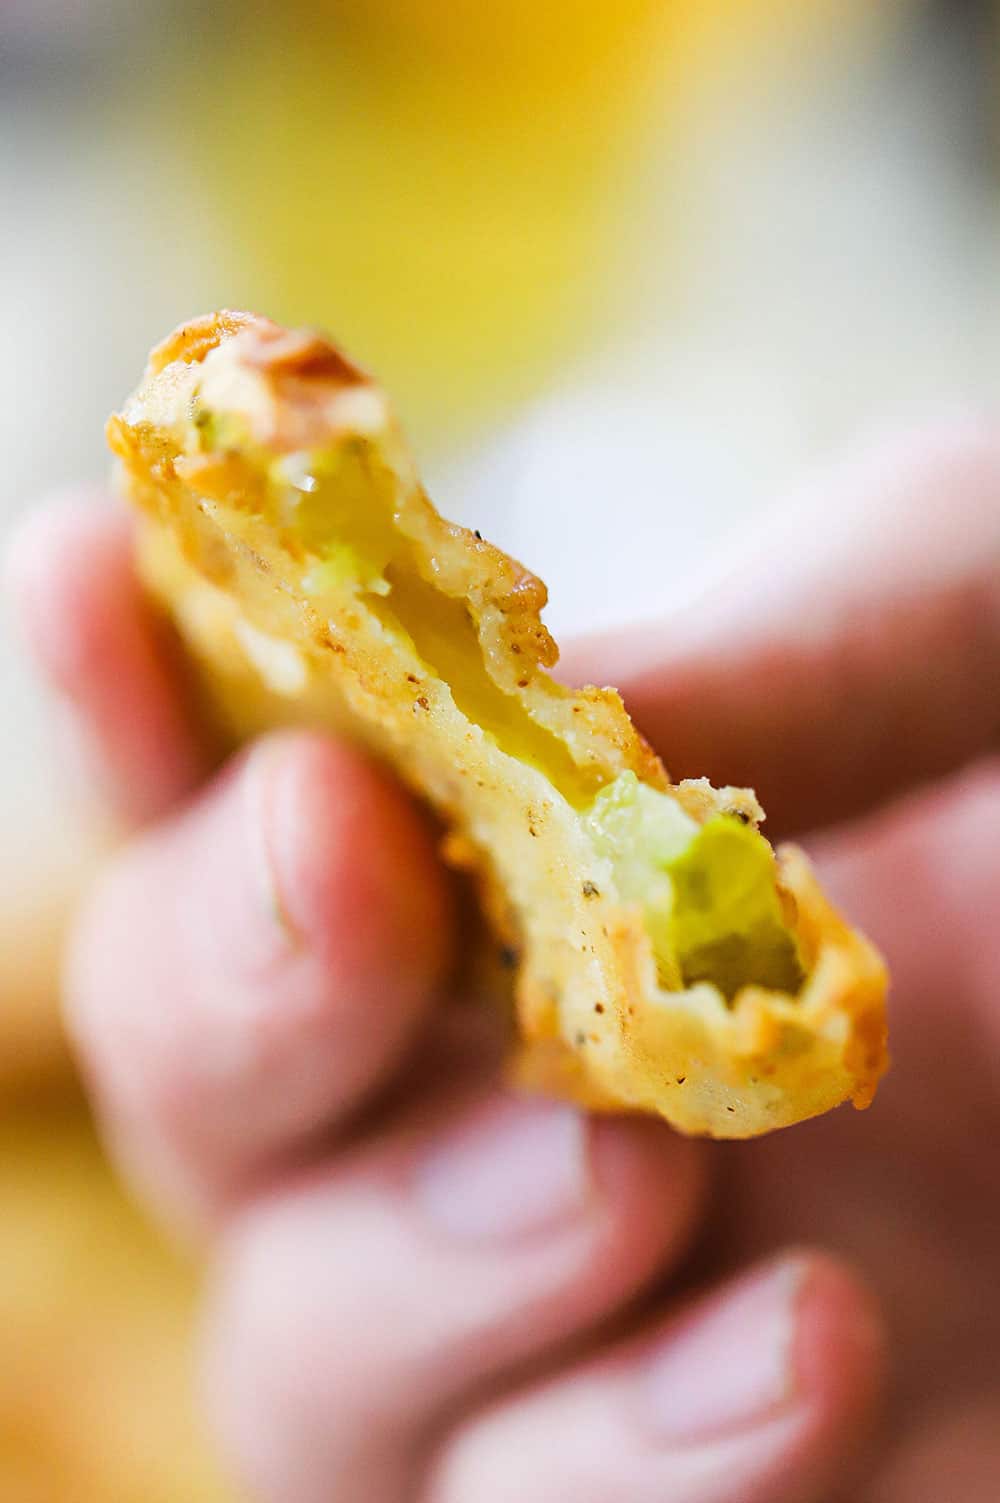 A hand holding up a fried pickle that has a bite taken out of it.